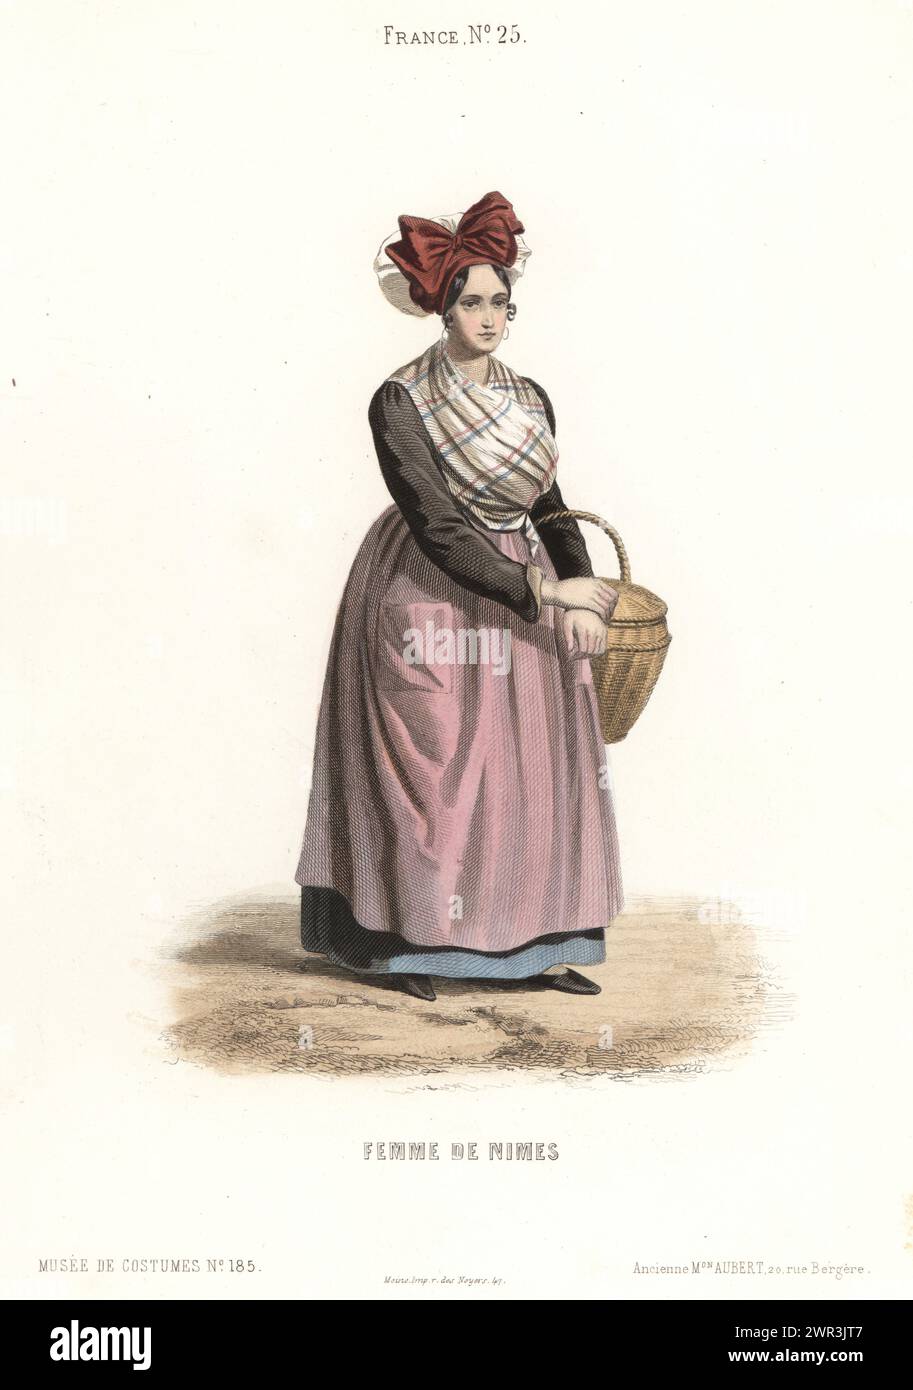 Woman of Nimes, Occitanie, southern France. Woman in bonnet with large ribbon tied in a bow, checkered fichu, cotton jacket, skirts, apron with pockets, holding a wicker basket. Femme de Nimes. Handcoloured steel engraving from Musée Cosmopolite, Musée de Costumes, Cosmopolitan Museum, published by ancienne maison Aubert, Paris, 1850. Stock Photo